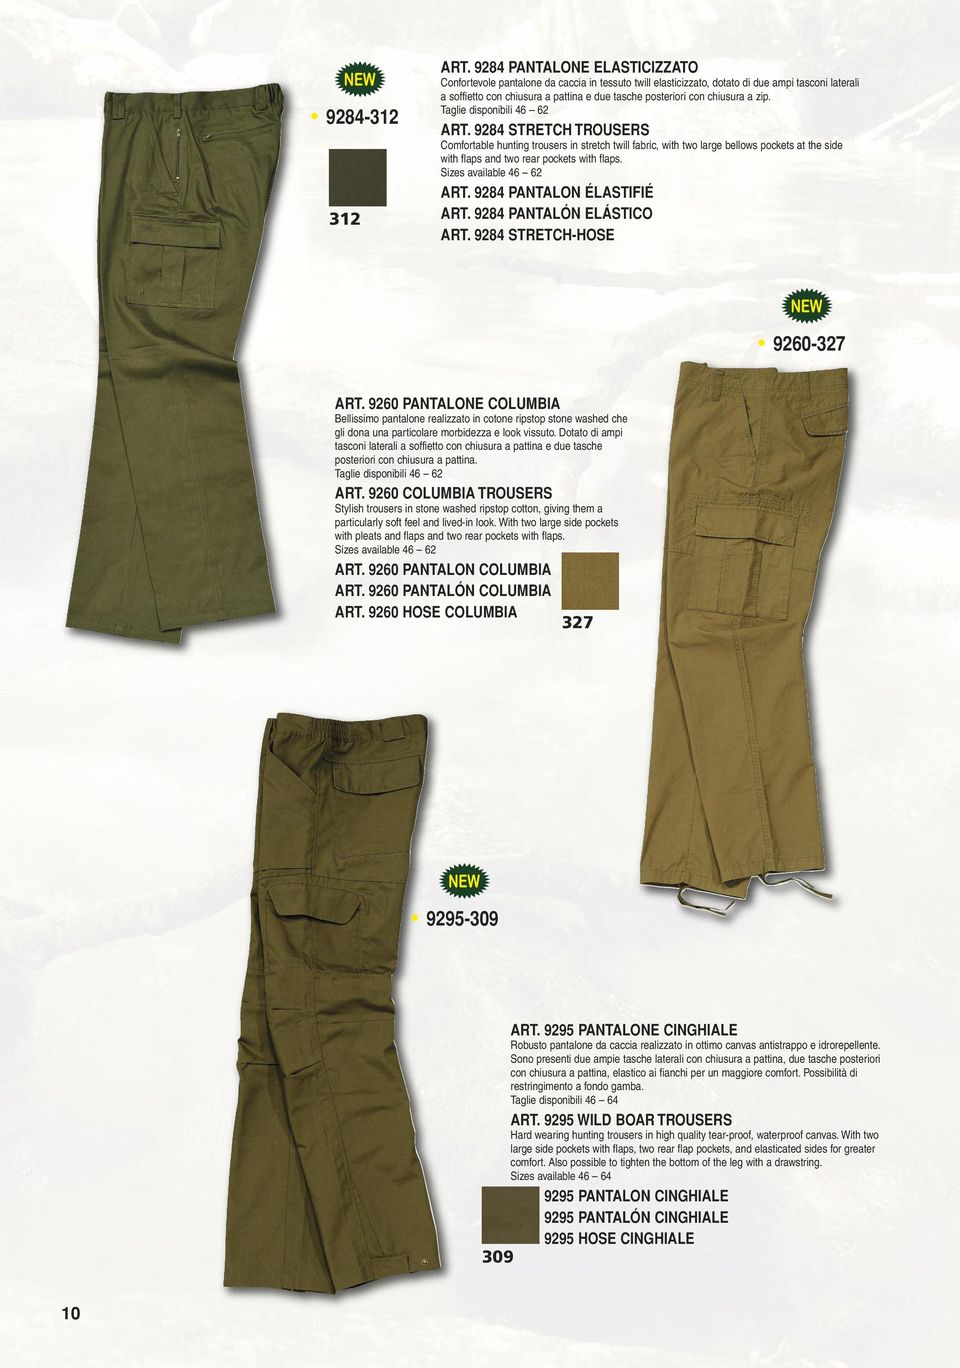 chiusura a zip. ART. 9284 STRETCH TROUSERS Comfortable hunting trousers in stretch twill fabric, with two large bellows pockets at the side with flaps and two rear pockets with flaps. ART. 9284 PANTALON ÉLASTIFIÉ ART.